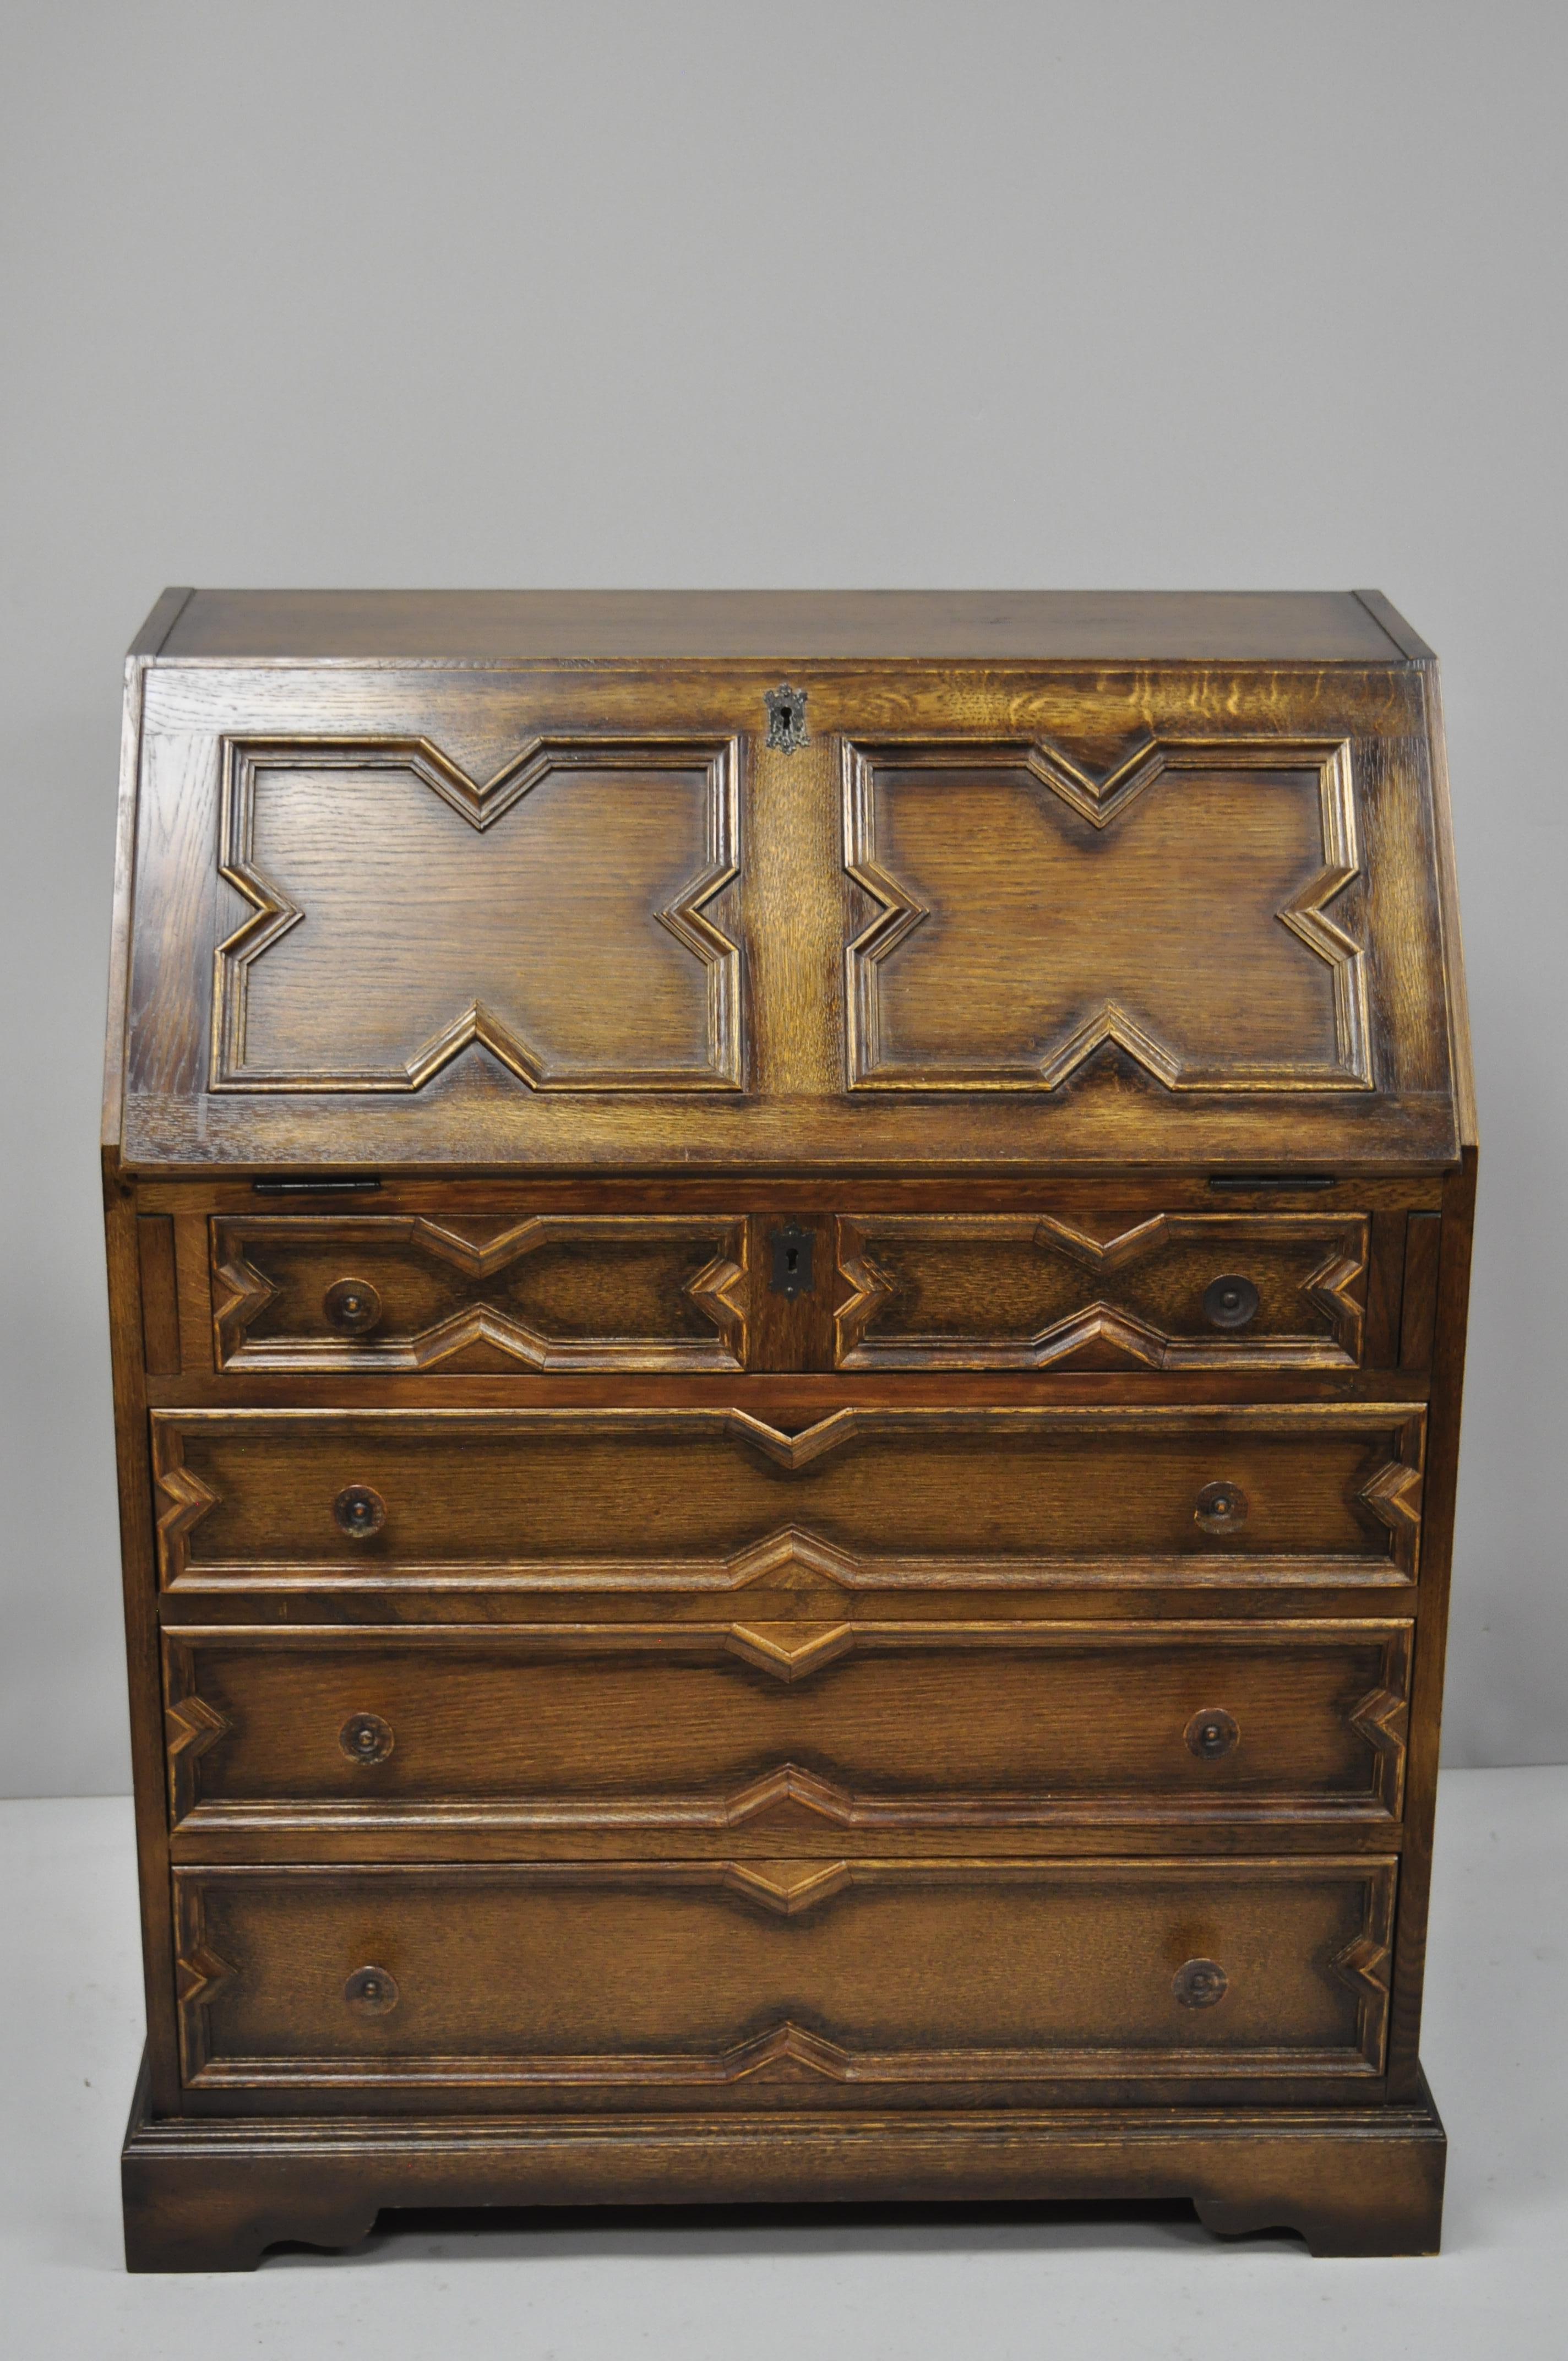 Antique English Jacobean style tiger oak wood drop front Secretary desk. Item features fitted interior, solid wood construction, beautiful wood grain, nicely carved details, 4 drawers, circa early 20th century. Measurements: 39